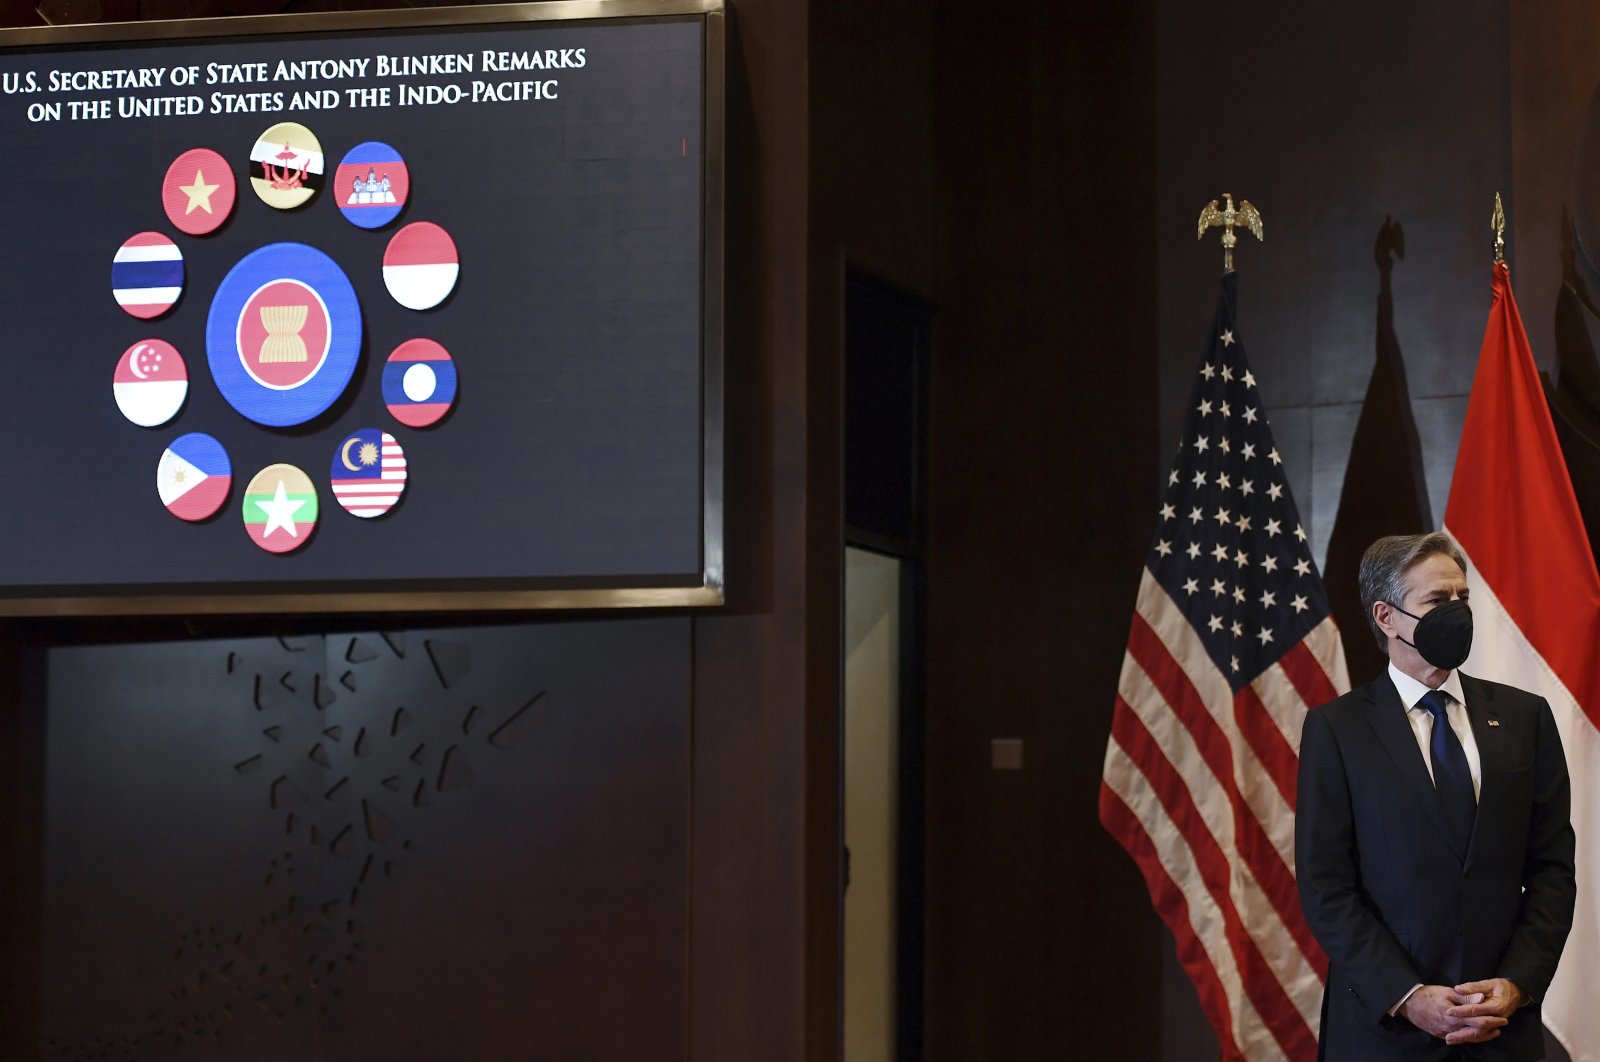 U.S. Secretary of State Antony Blinken is introduced to speak on the Biden administration&#039;s Indo-Pacific strategy at the Universitas Indonesia in Jakarta, Dec. 14, 2021. (AP Photo)